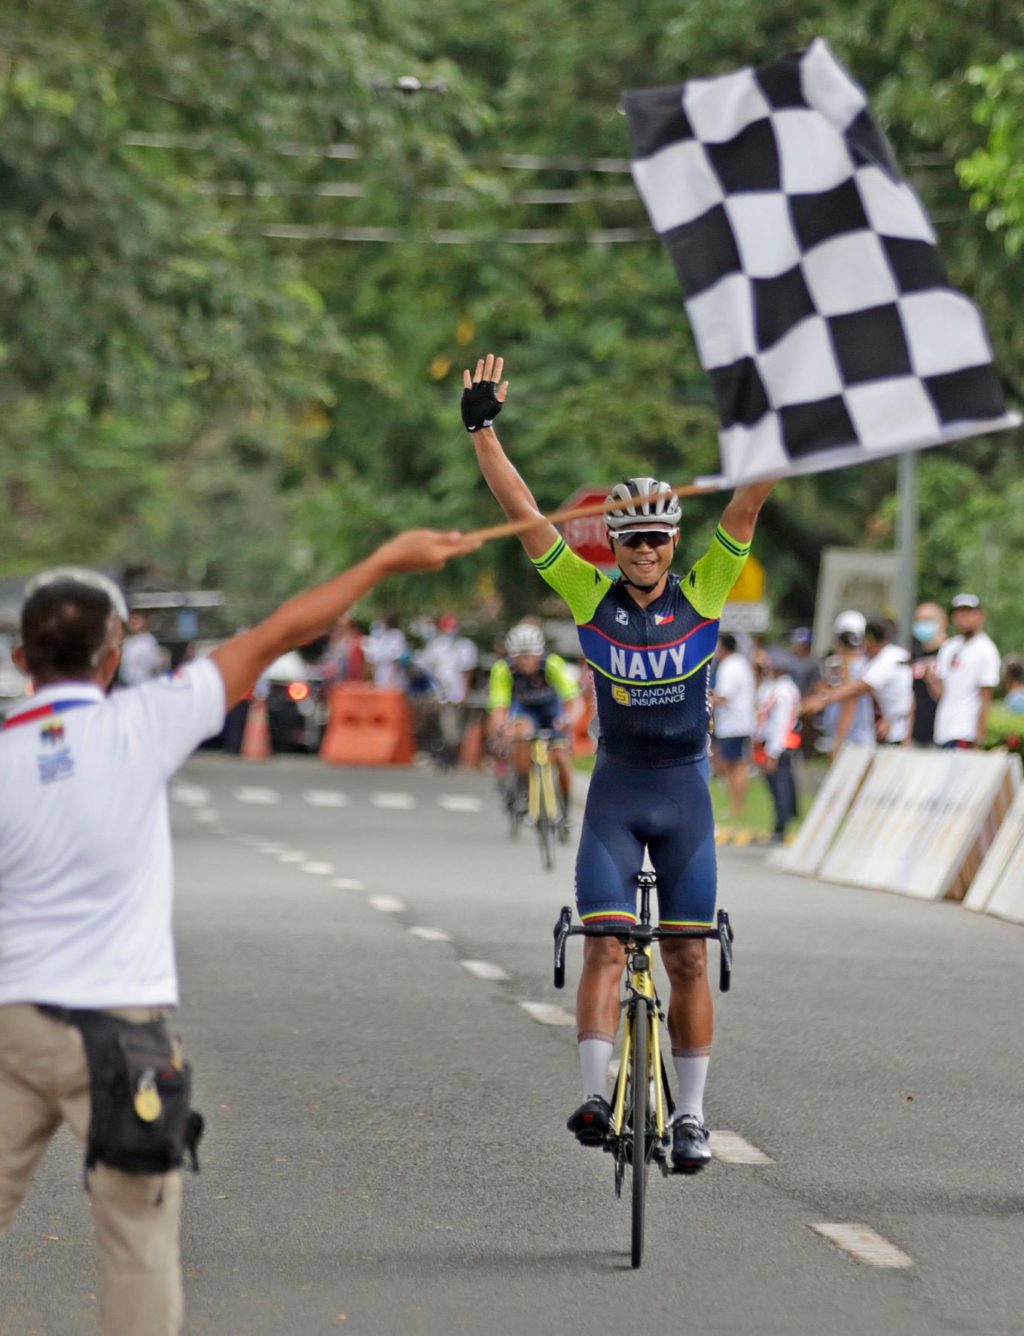 PHILIPPINE NAVY TEAM DOMINATES.  In photo is Ronald Oranza of the Philippine Navy-Standard Insurance Cycling Team, who raises his hands at the finish line after topping the men's road race in last Sunday's PhilCycling National Trials in Clark Freeport Zone in Pampanga. | Contributed Photo